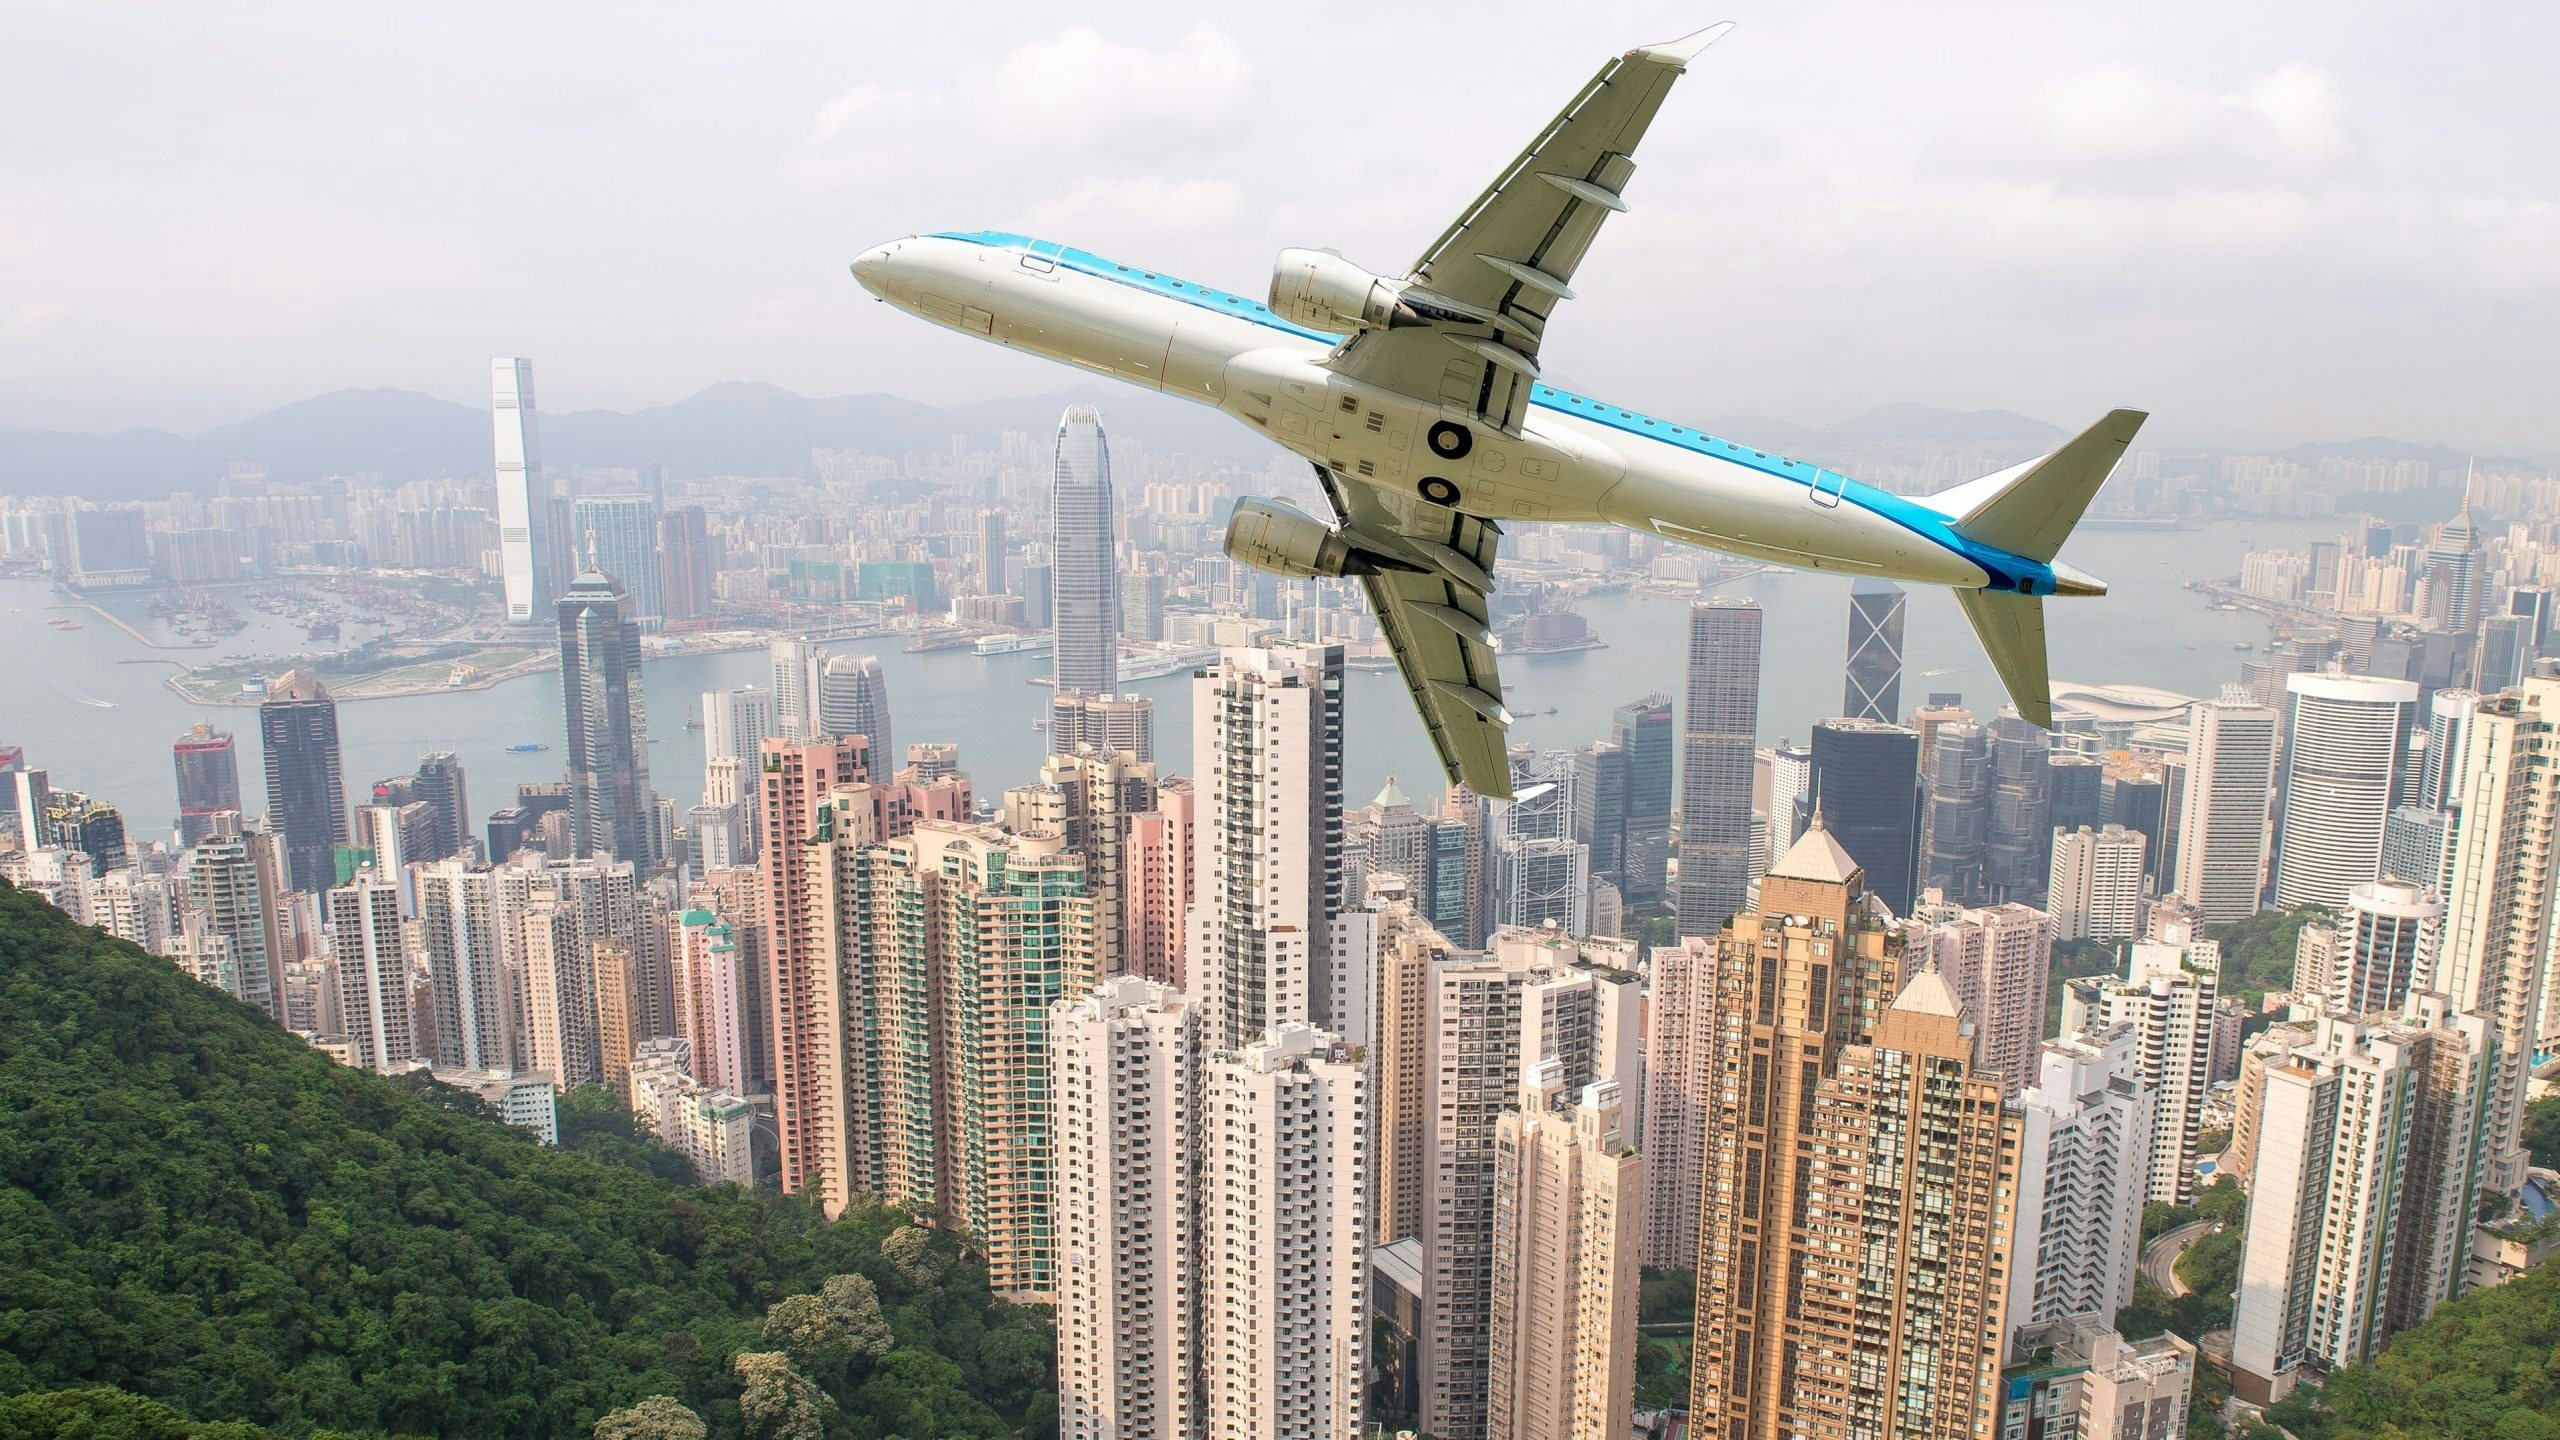 The city is giving away free flights next year to revive its battered visitor economy. But there are no expectations of a V-shaped rebound. Photo: Shutterstock